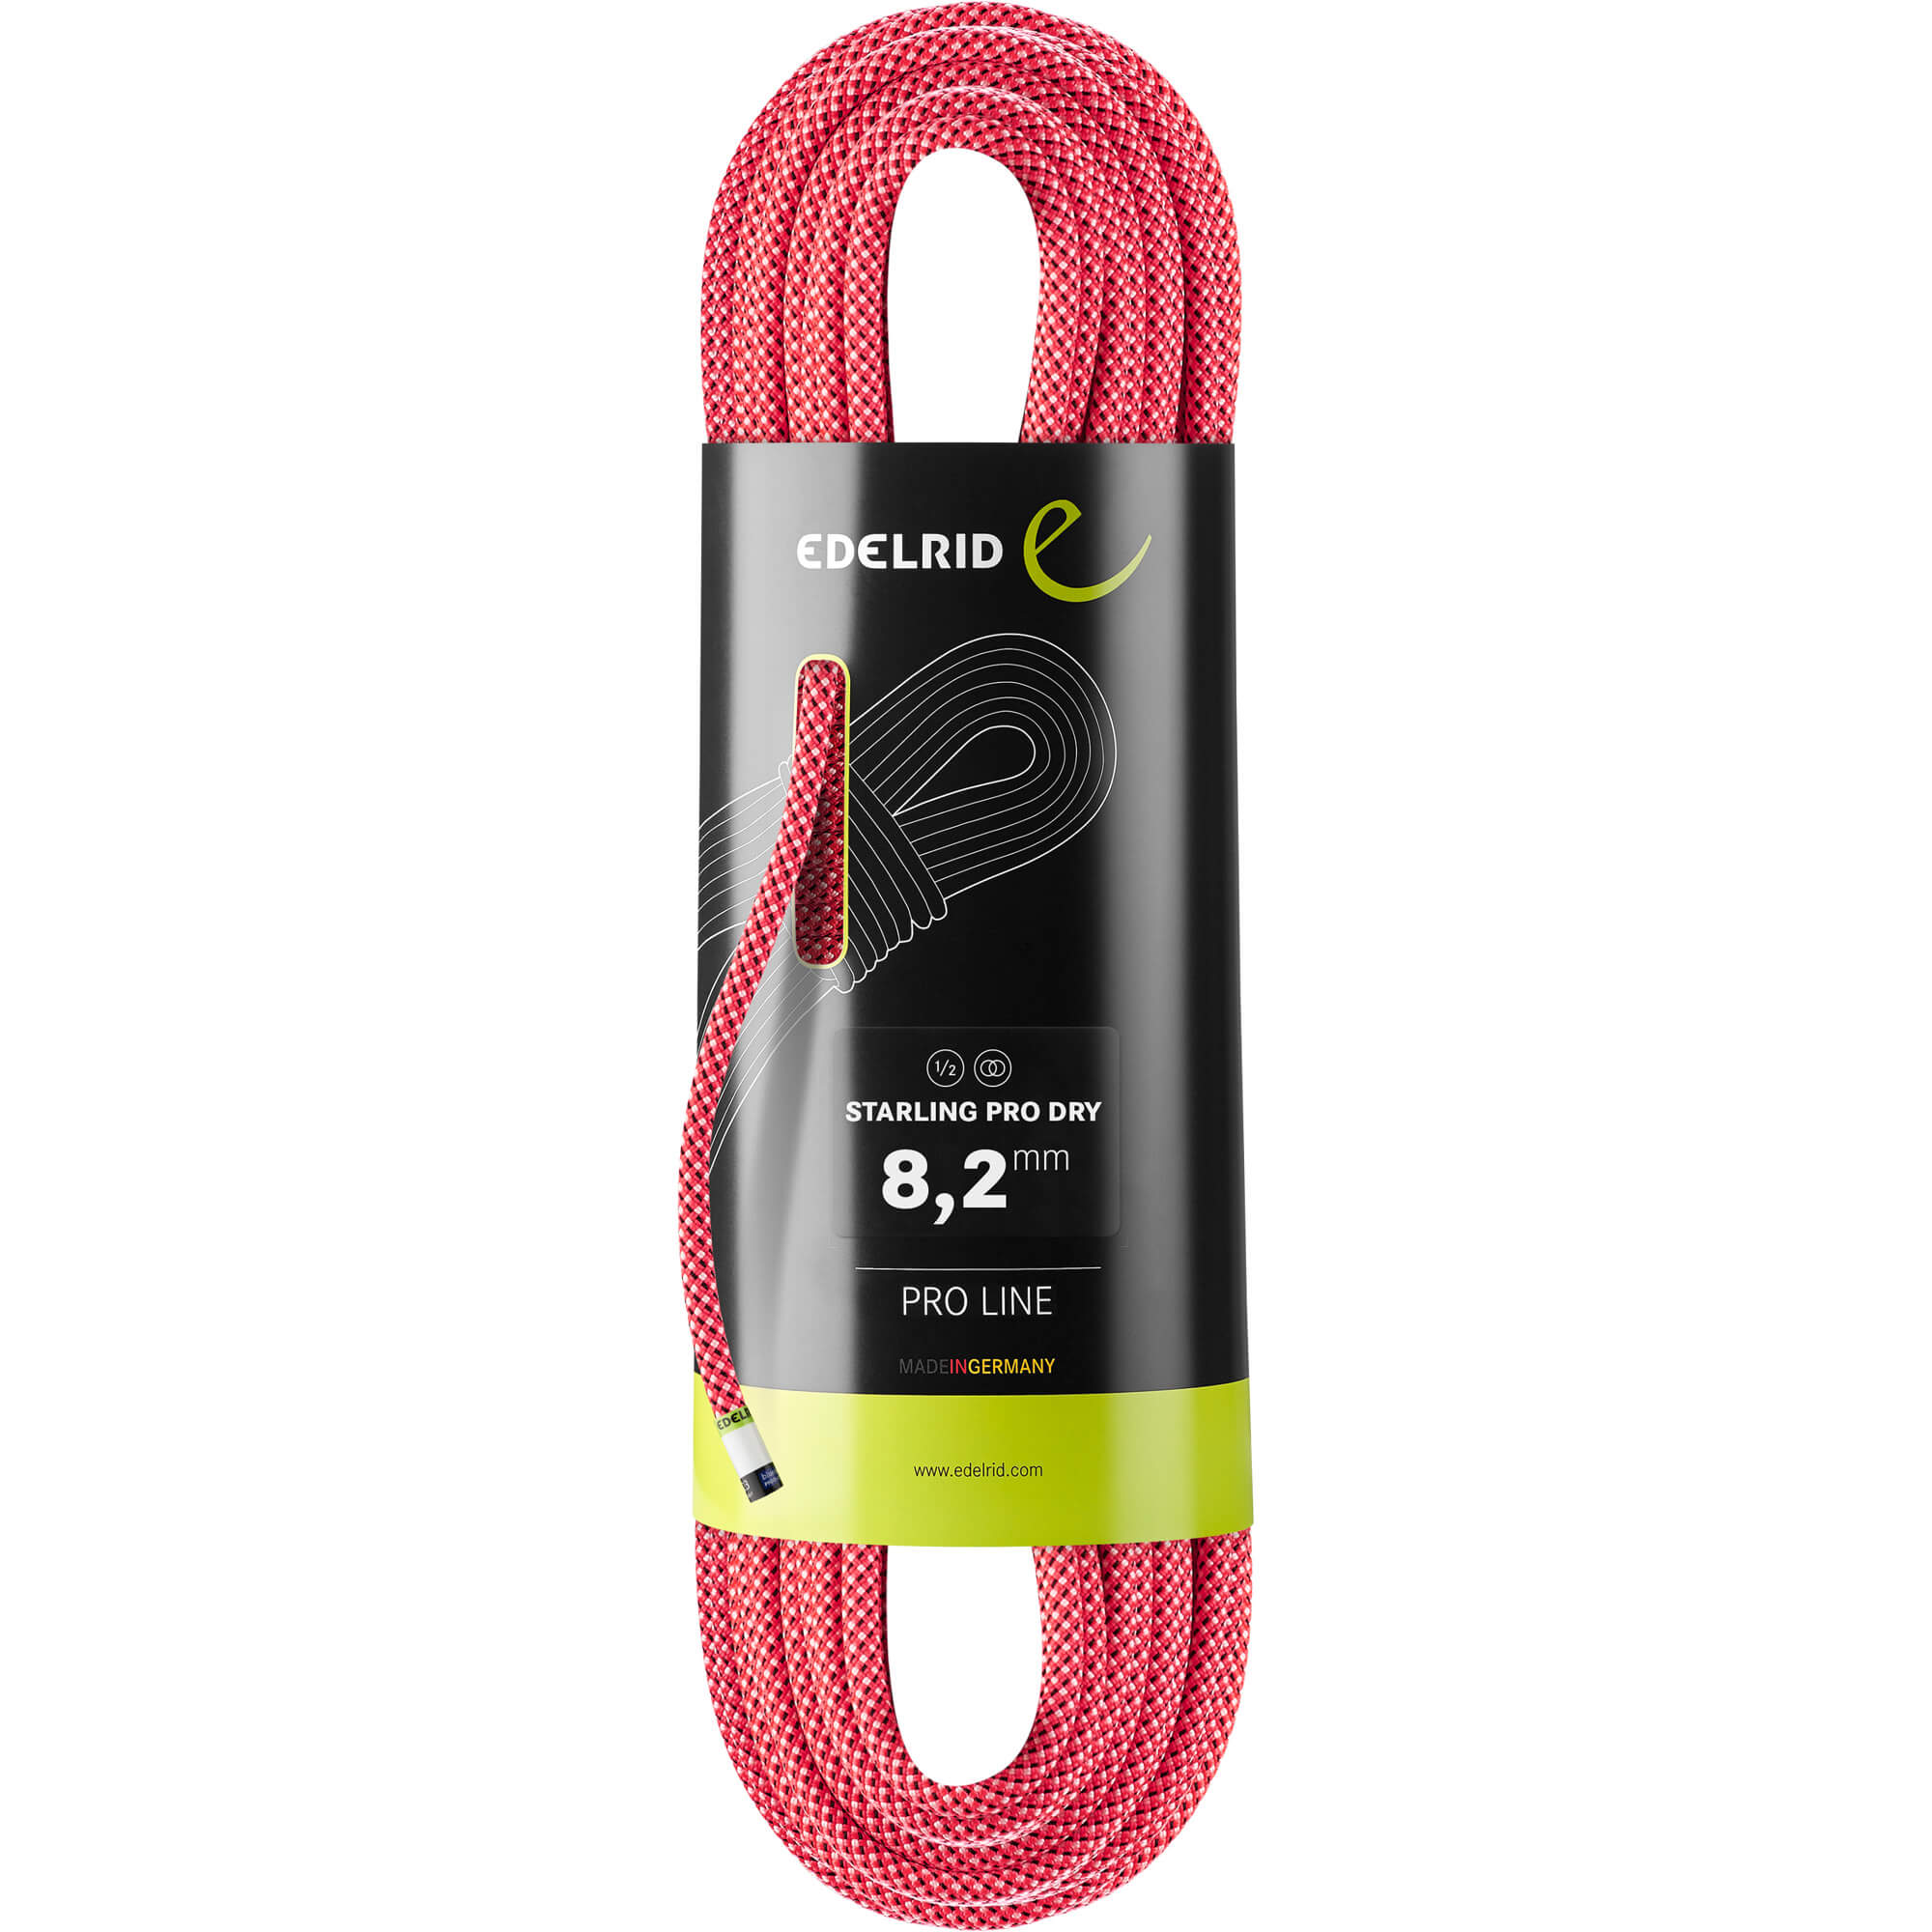 Edelrid Starling Pro Dry 8.2 MM Climbing Rope